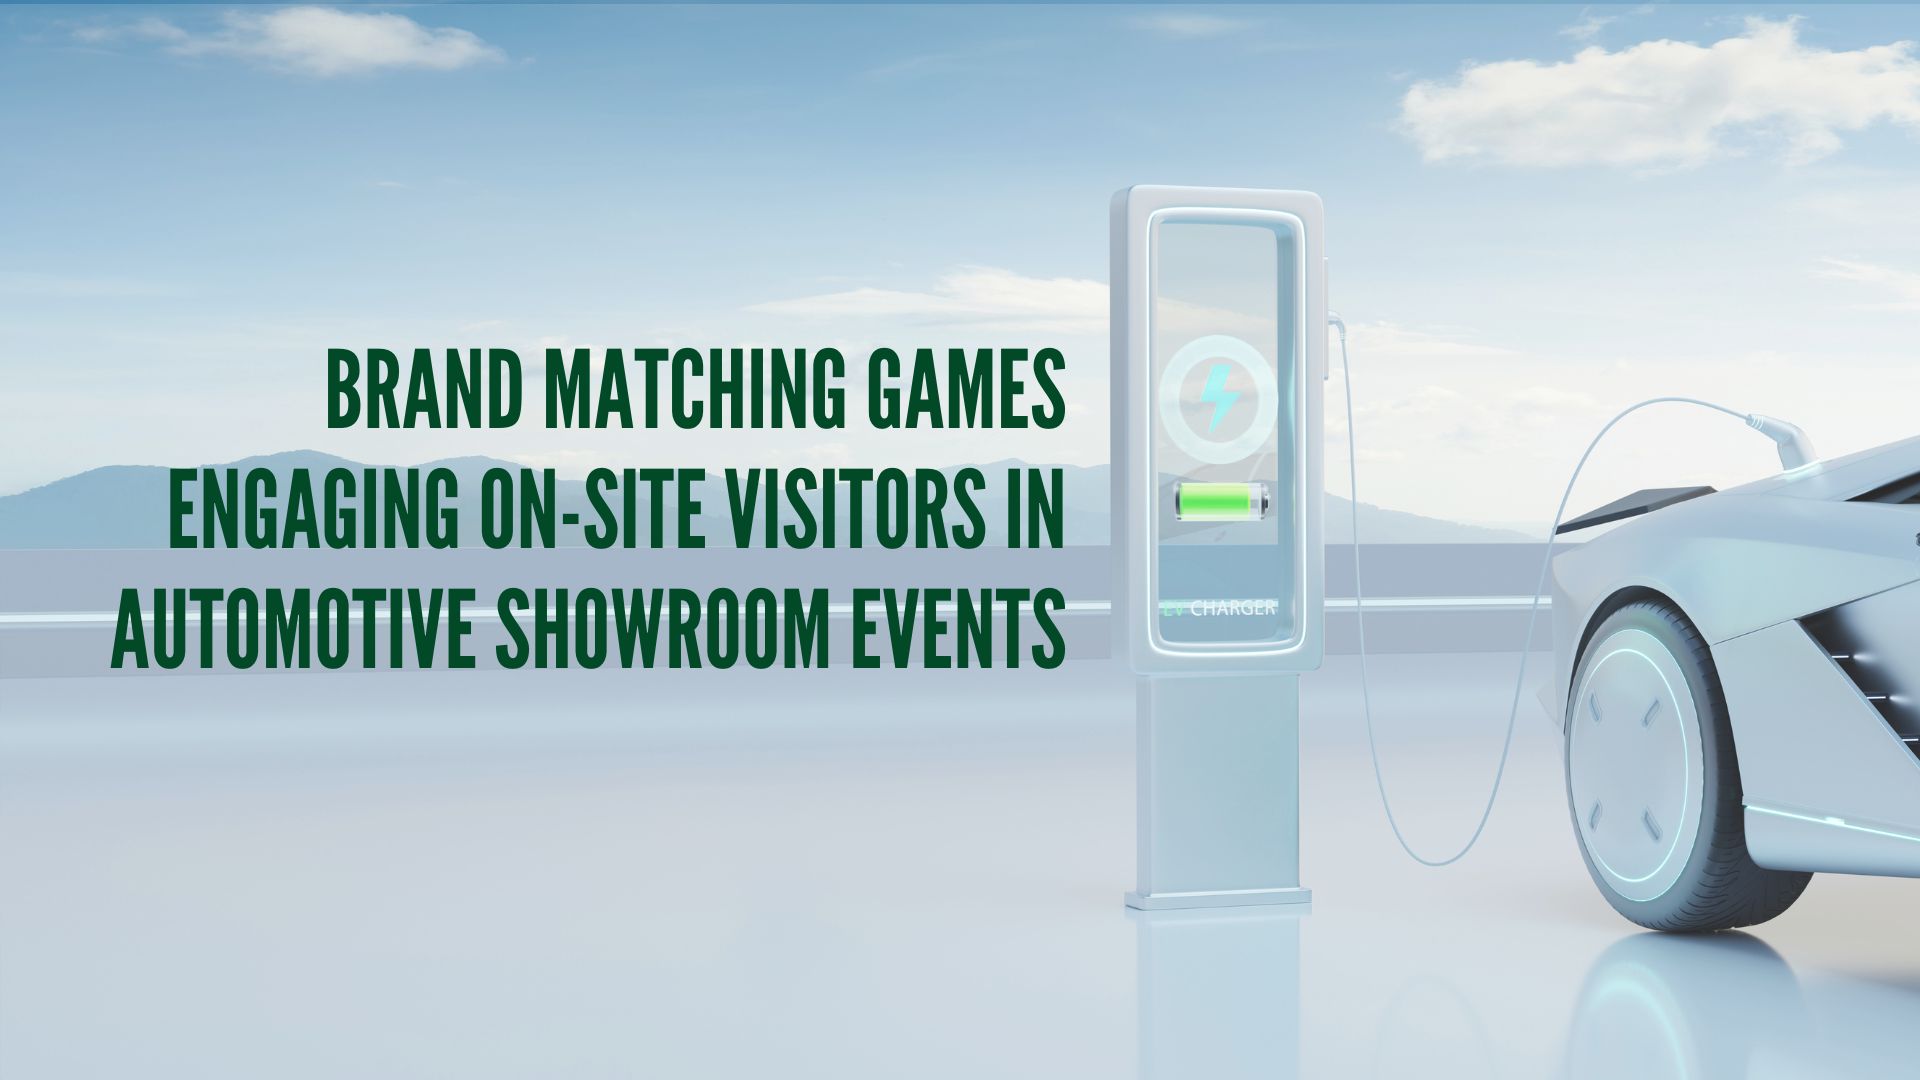 Brand Matching Games: Engaging On-site Visitors in Automotive Showroom Events